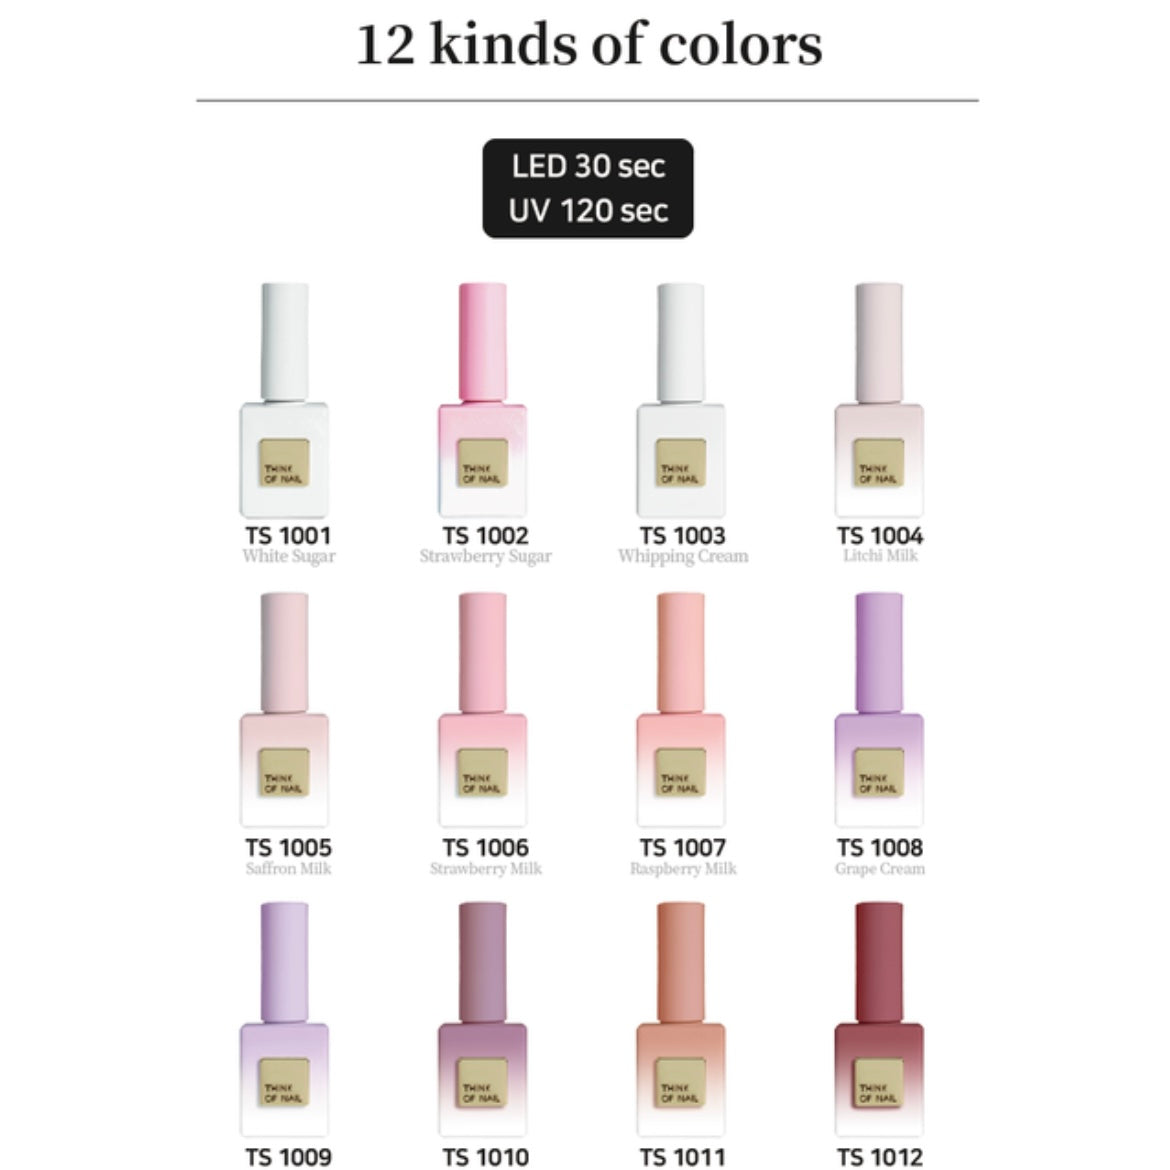 THINK OF NAIL Full Set (12 bottles) of Milk & Cream COLLECTION (12x 8 ml)